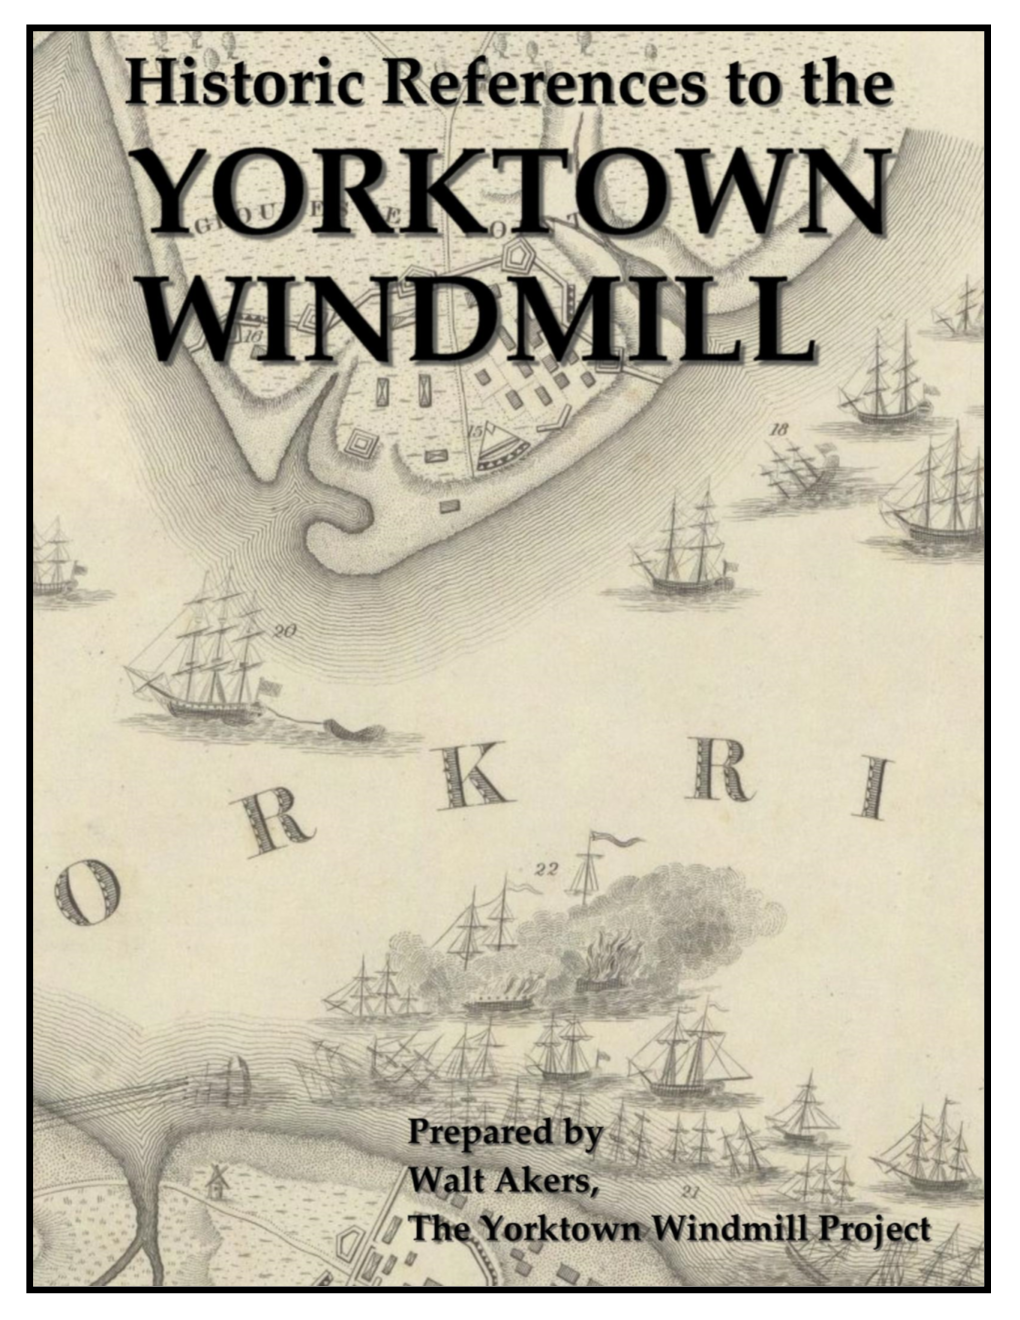 Historical References to the Yorktown Windmill Historical References to the Yorktown Windmill